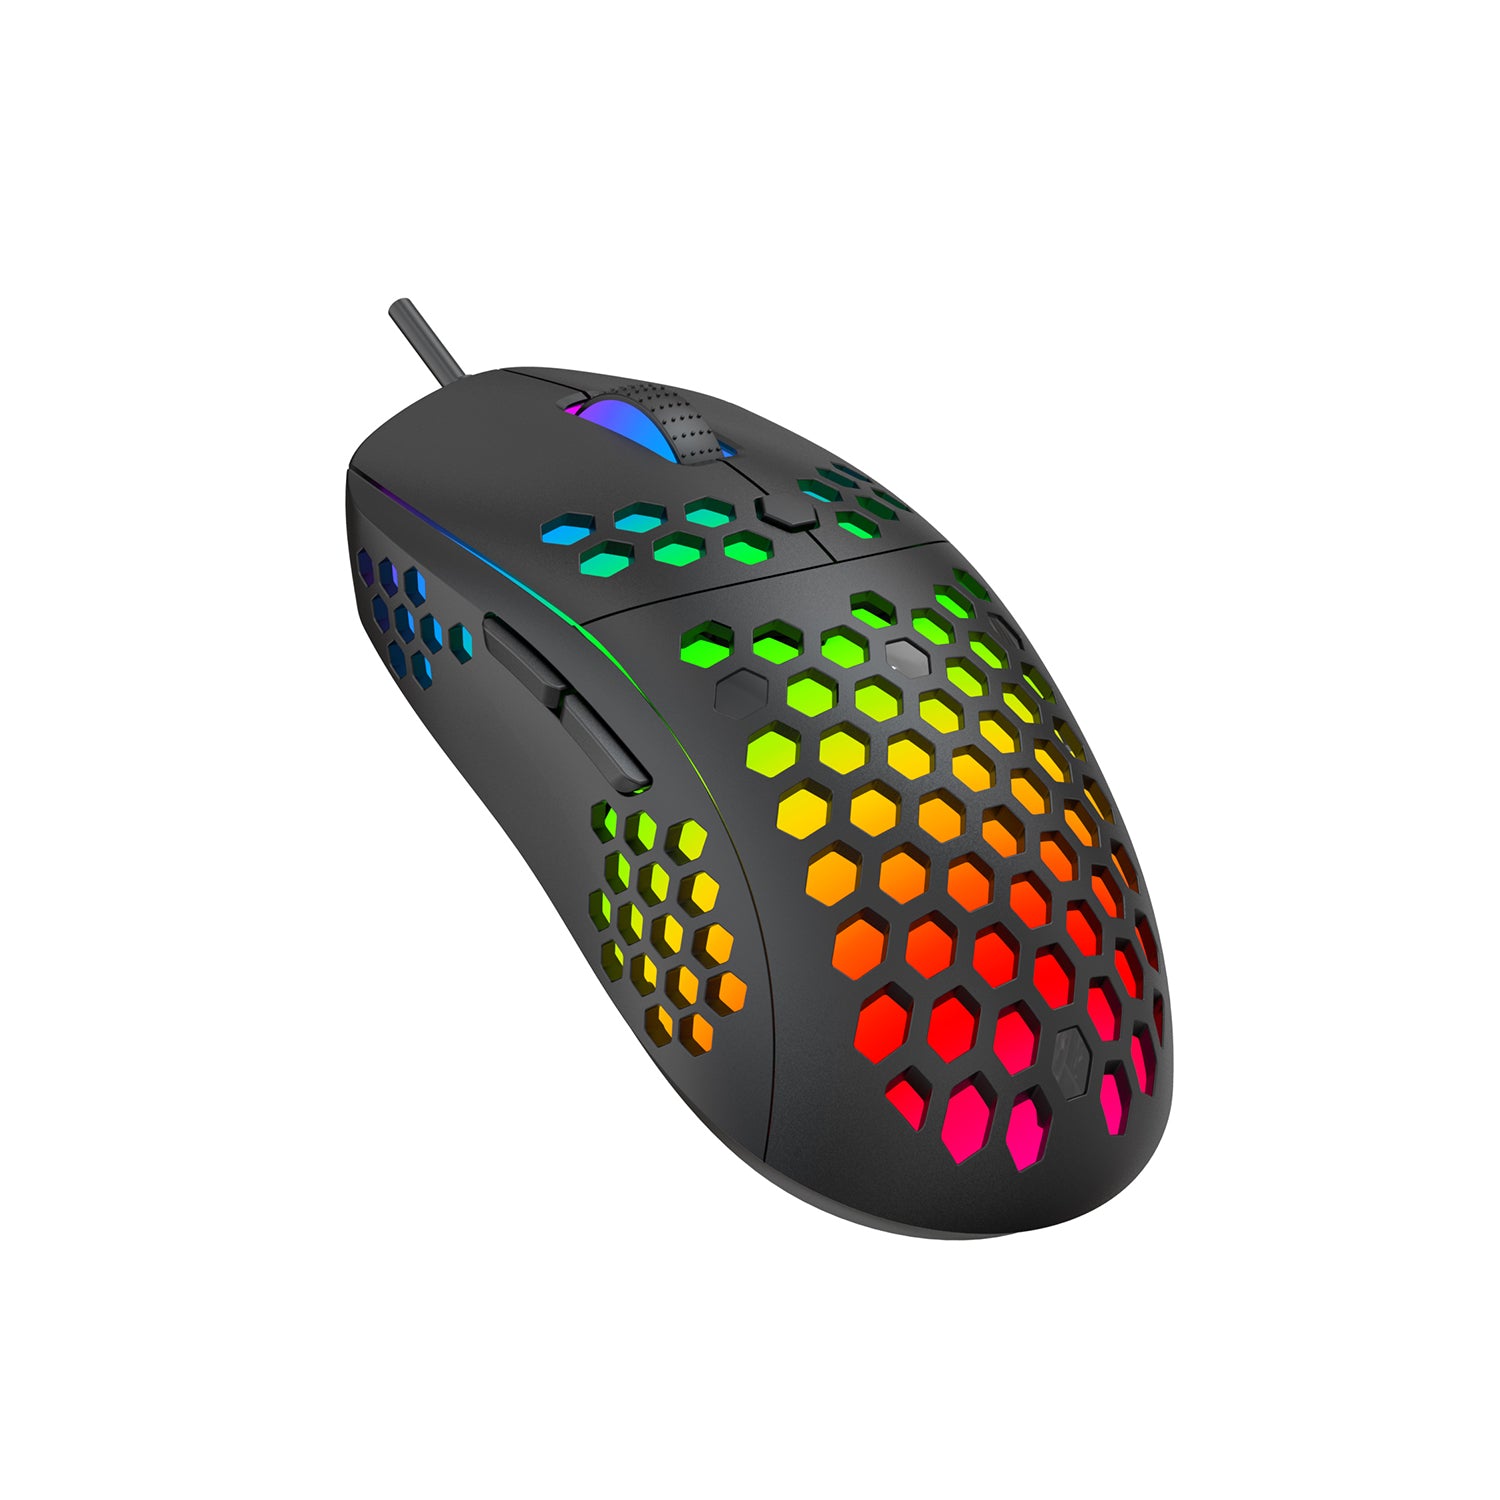 HAVIT MS878 RGB Backlit Programmable Gaming Mouse with Lightweight Honeycomb Shell